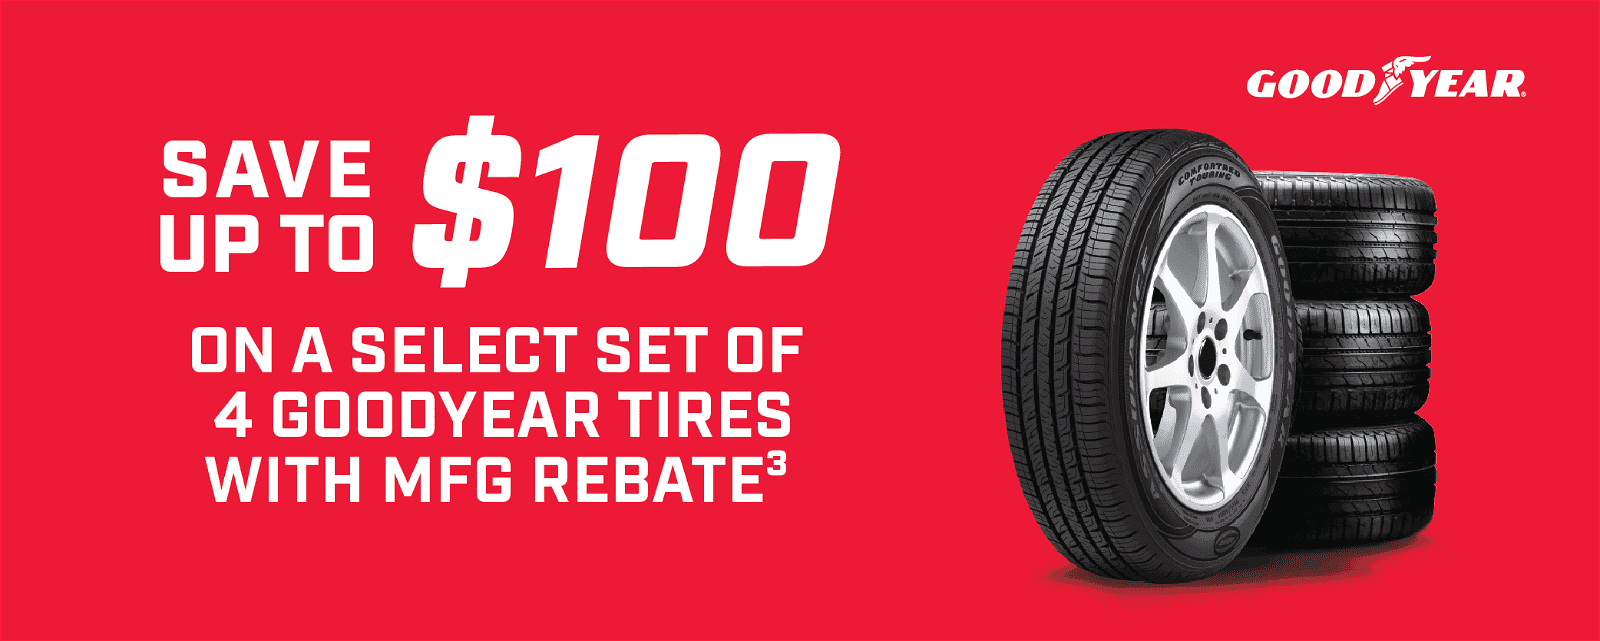 Save up to \\$100 on select set of 4 Goodyear Tires with MFG Rebate3